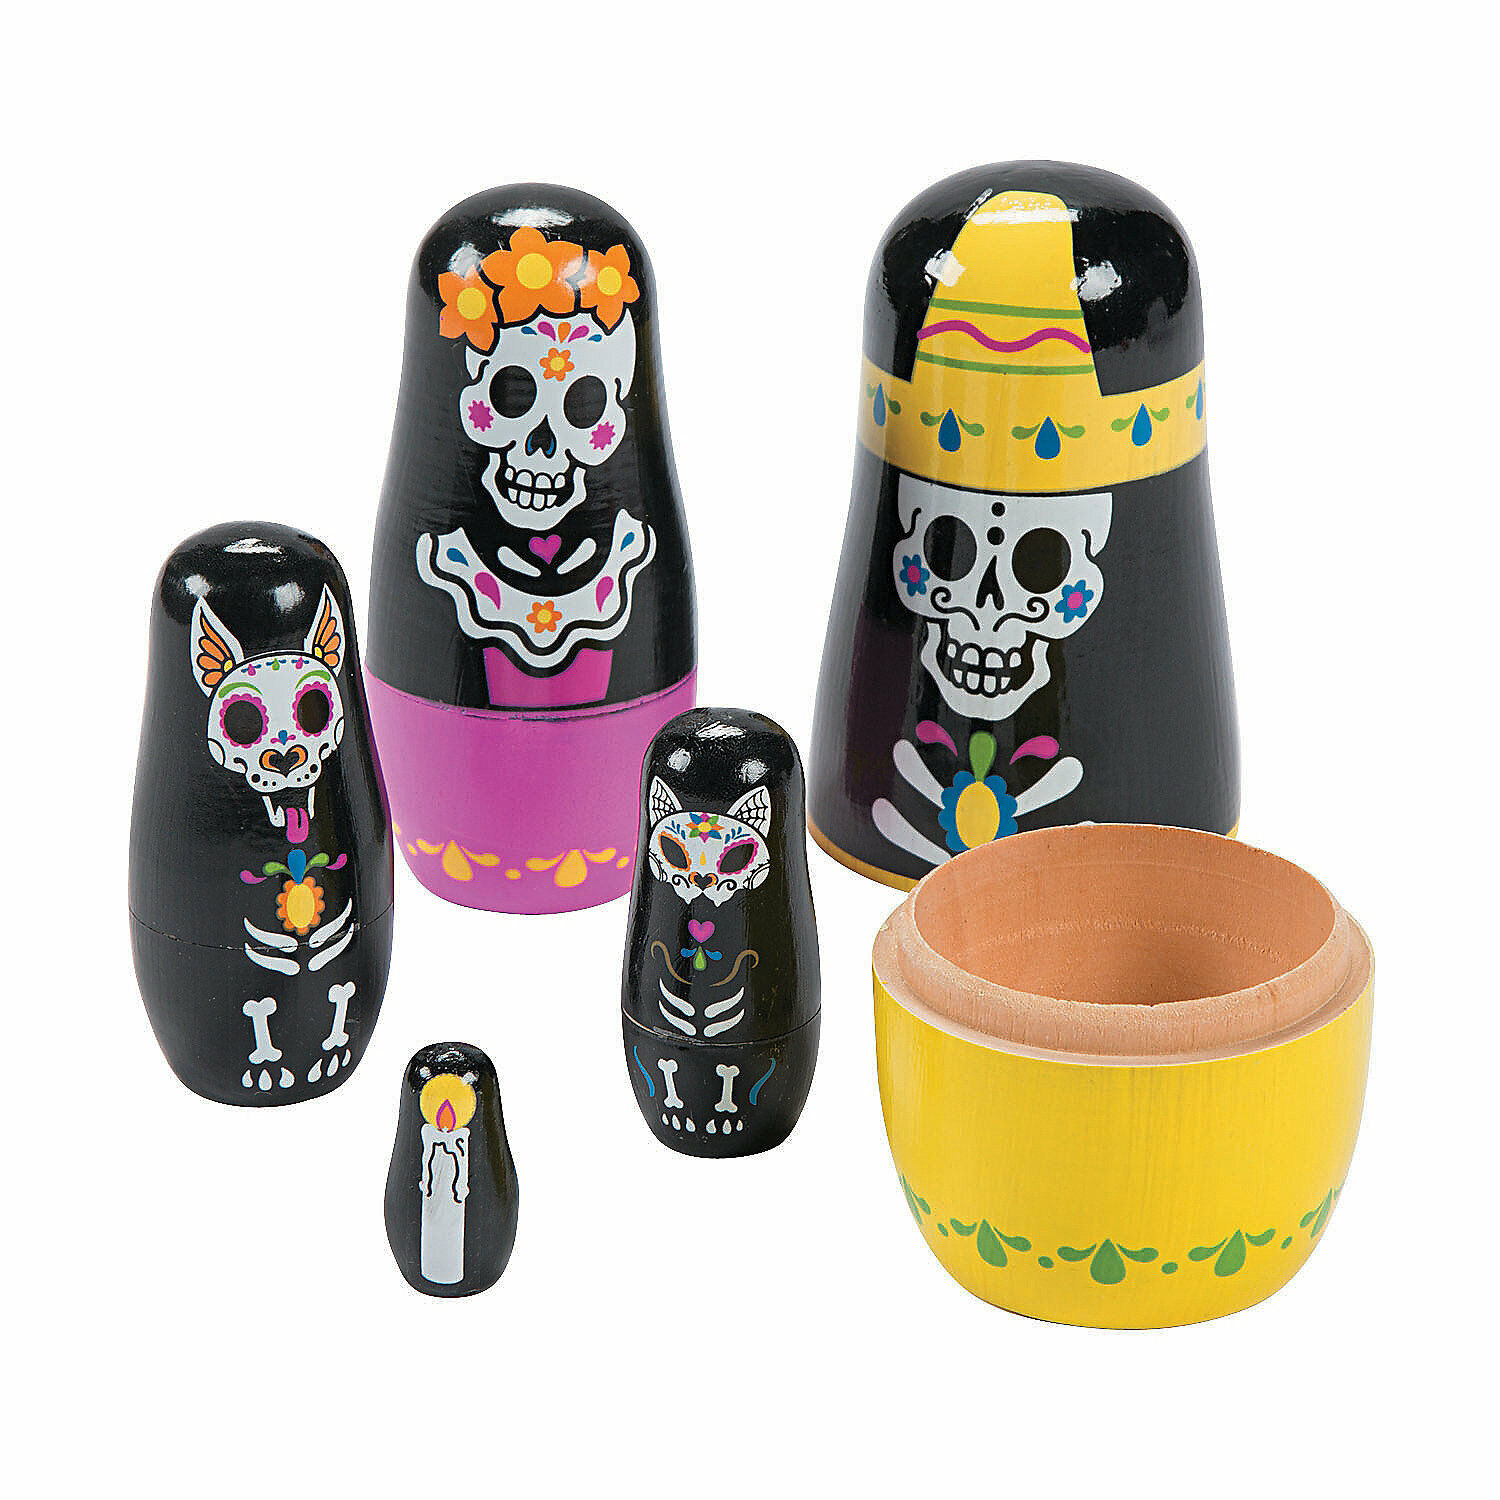 Day Of The Dead Nesting Characters, Toys, 5 Pieces